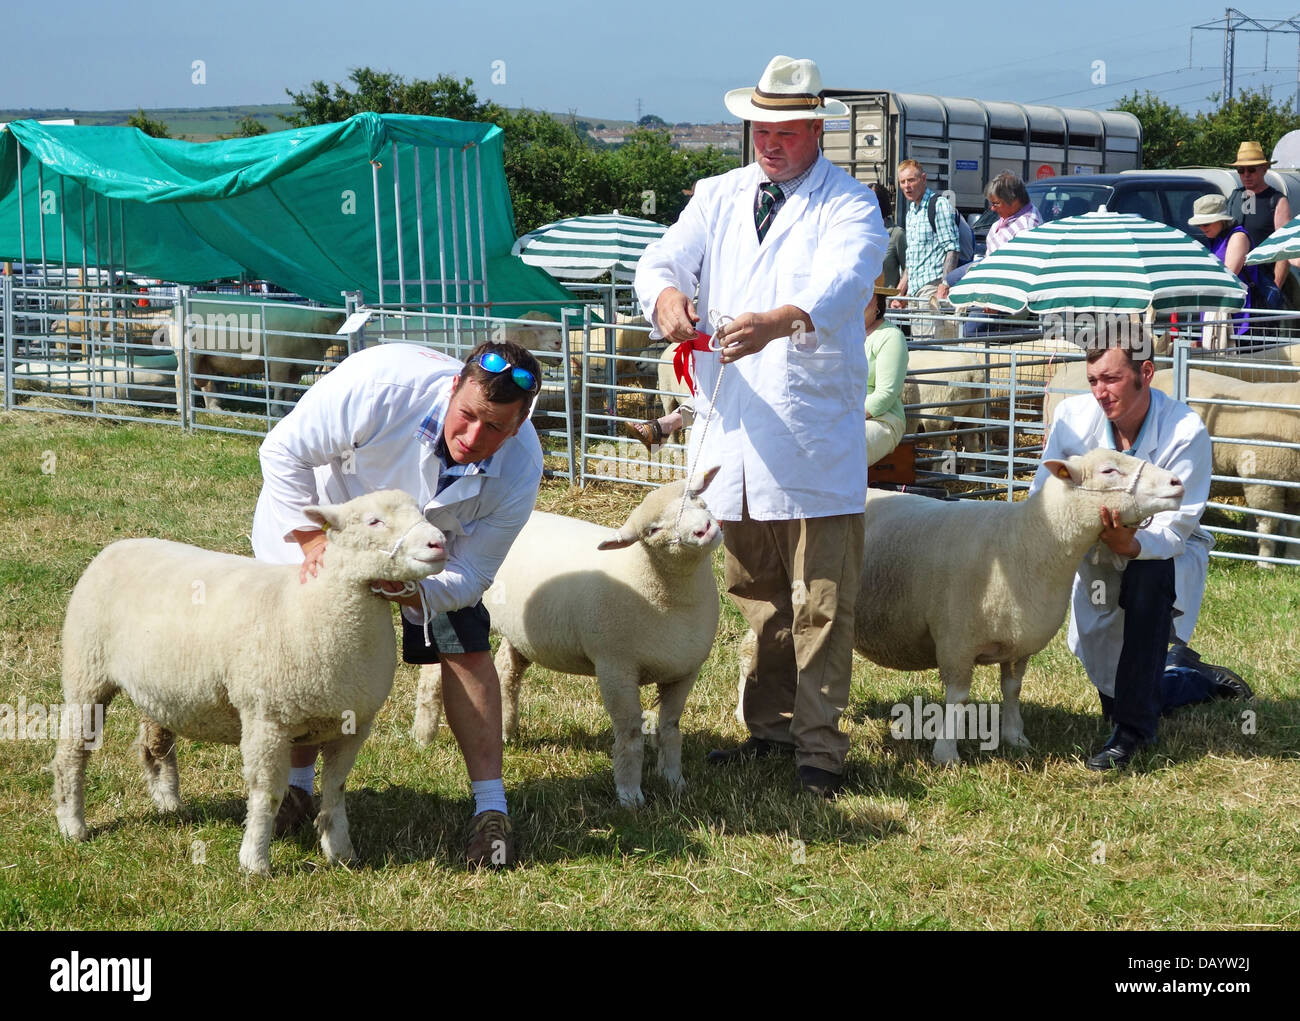 Sheep being judged at a livestock show in cornwall, UK Stock Photo